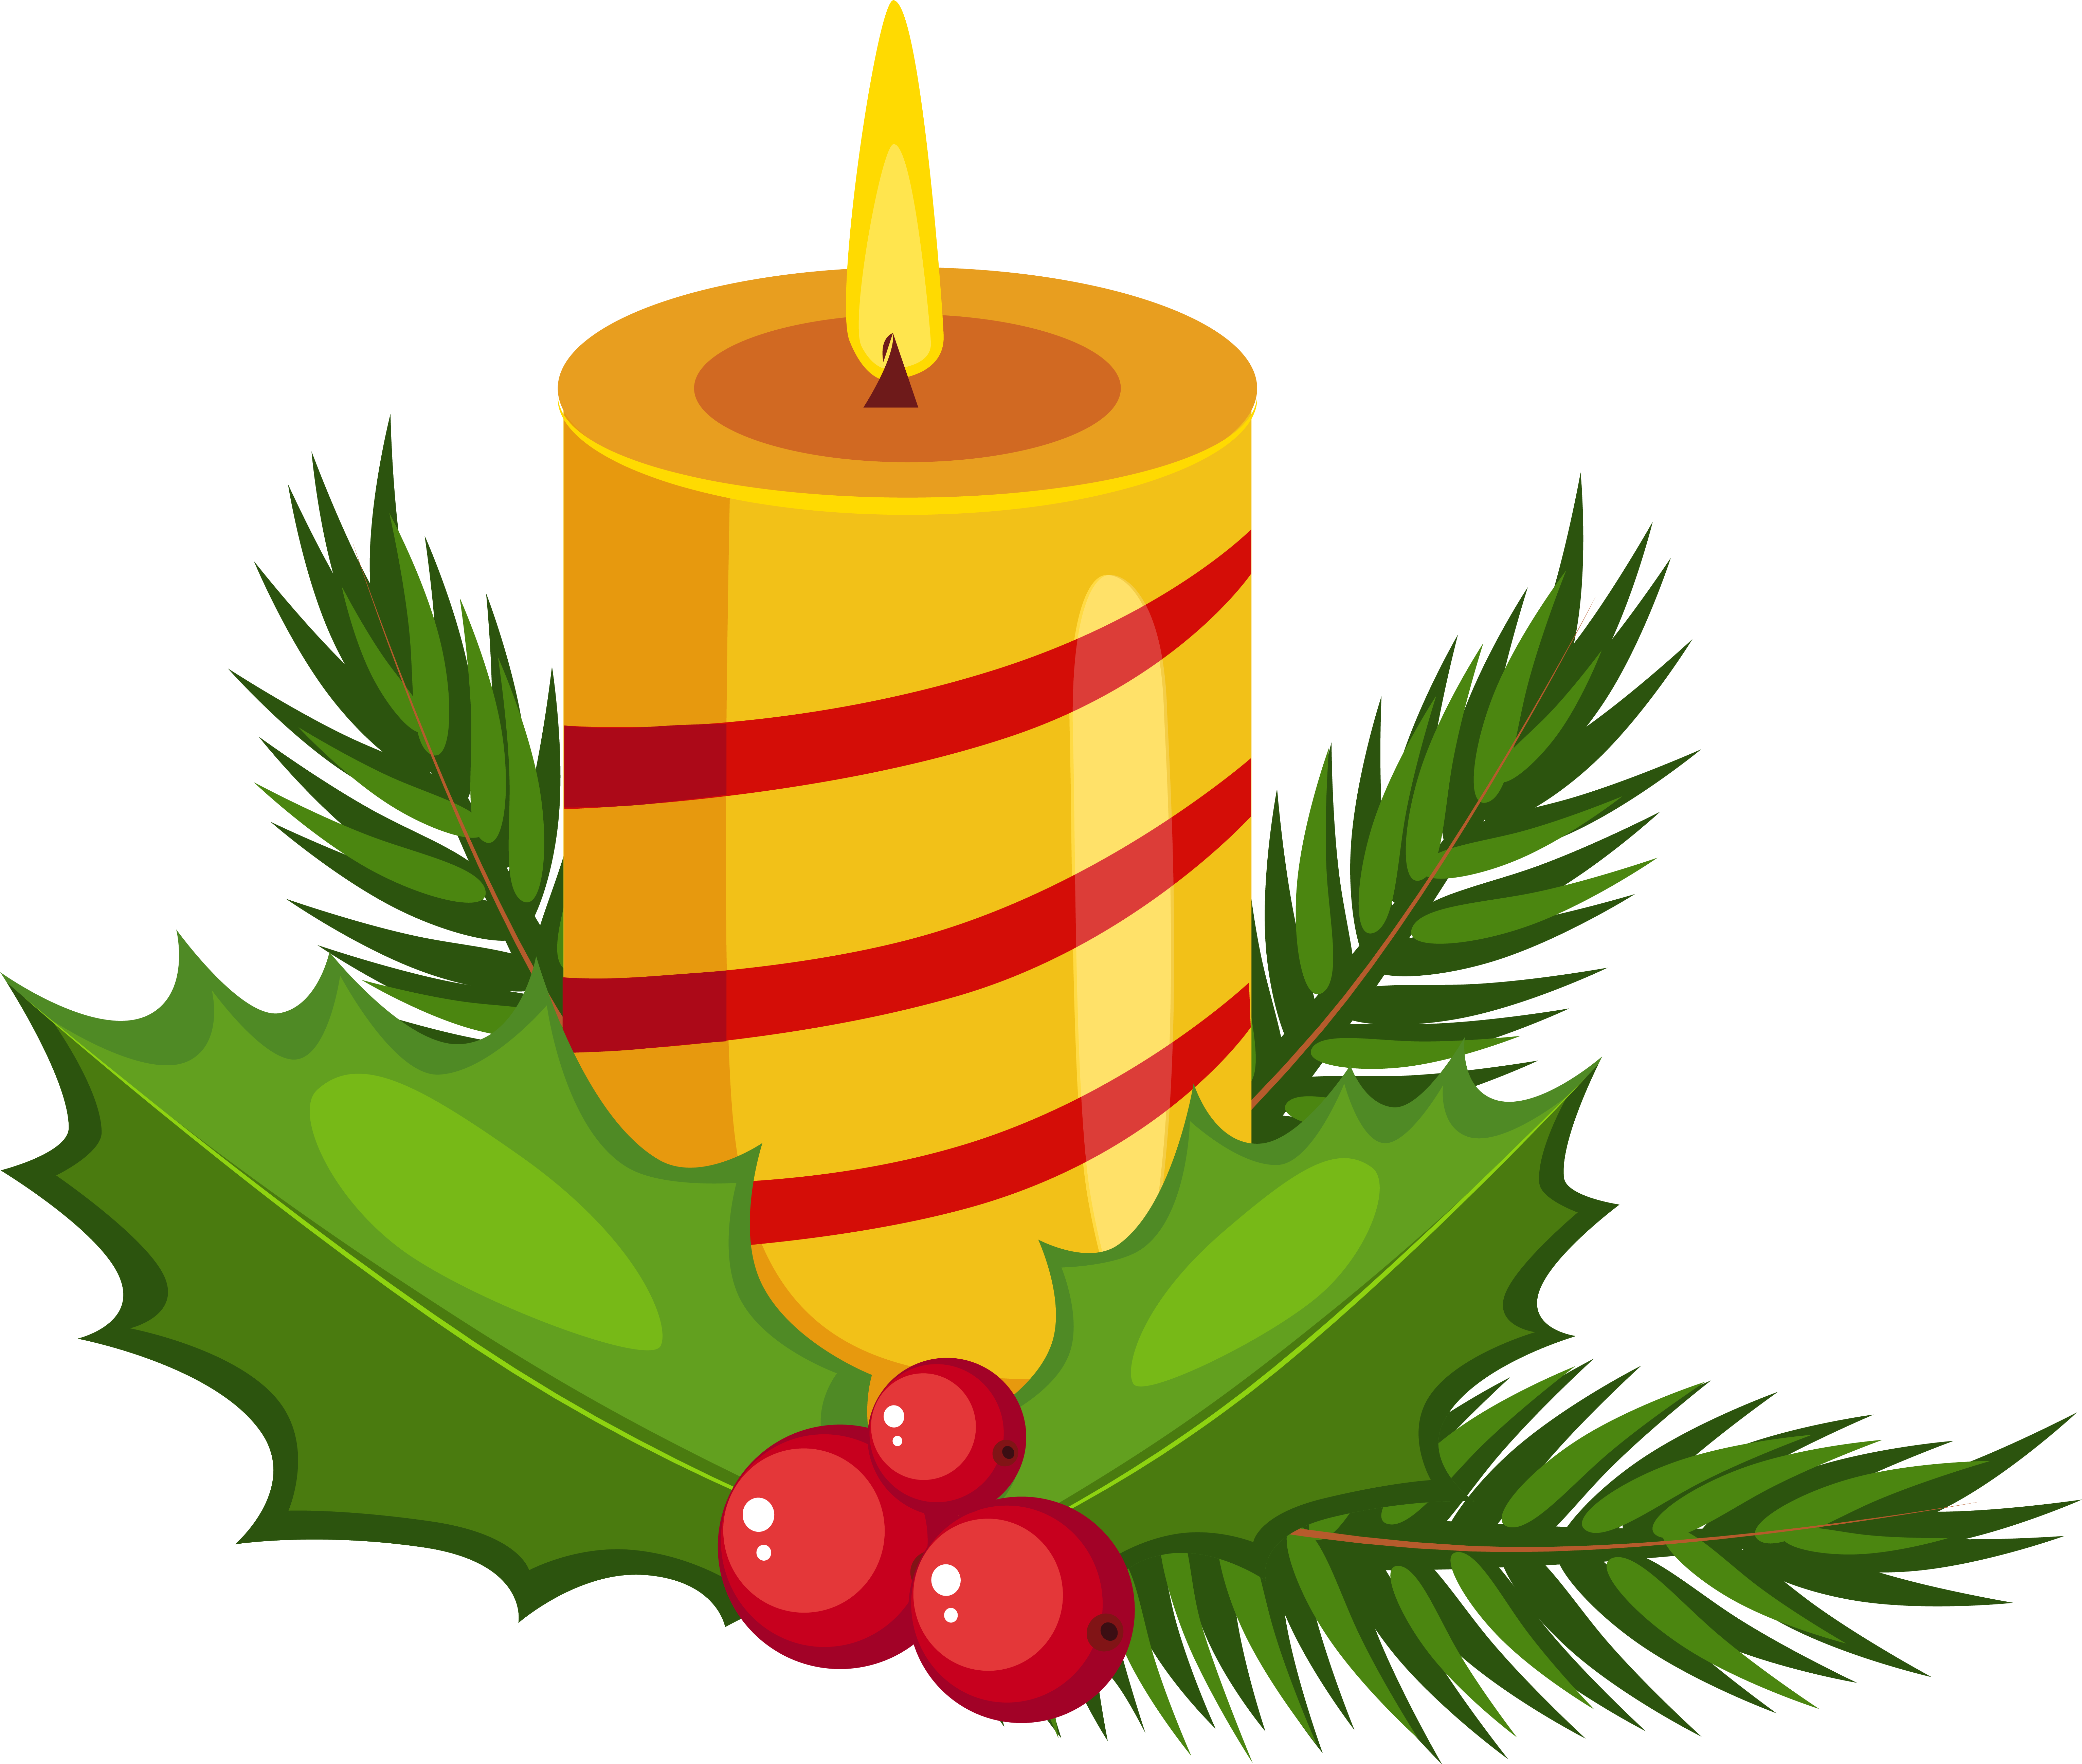 Clip Art Of Christmas Candle Clipart Holly Pencil And - Clip Art Of Christmas Candle Clipart Holly Pencil And (6256x5339)